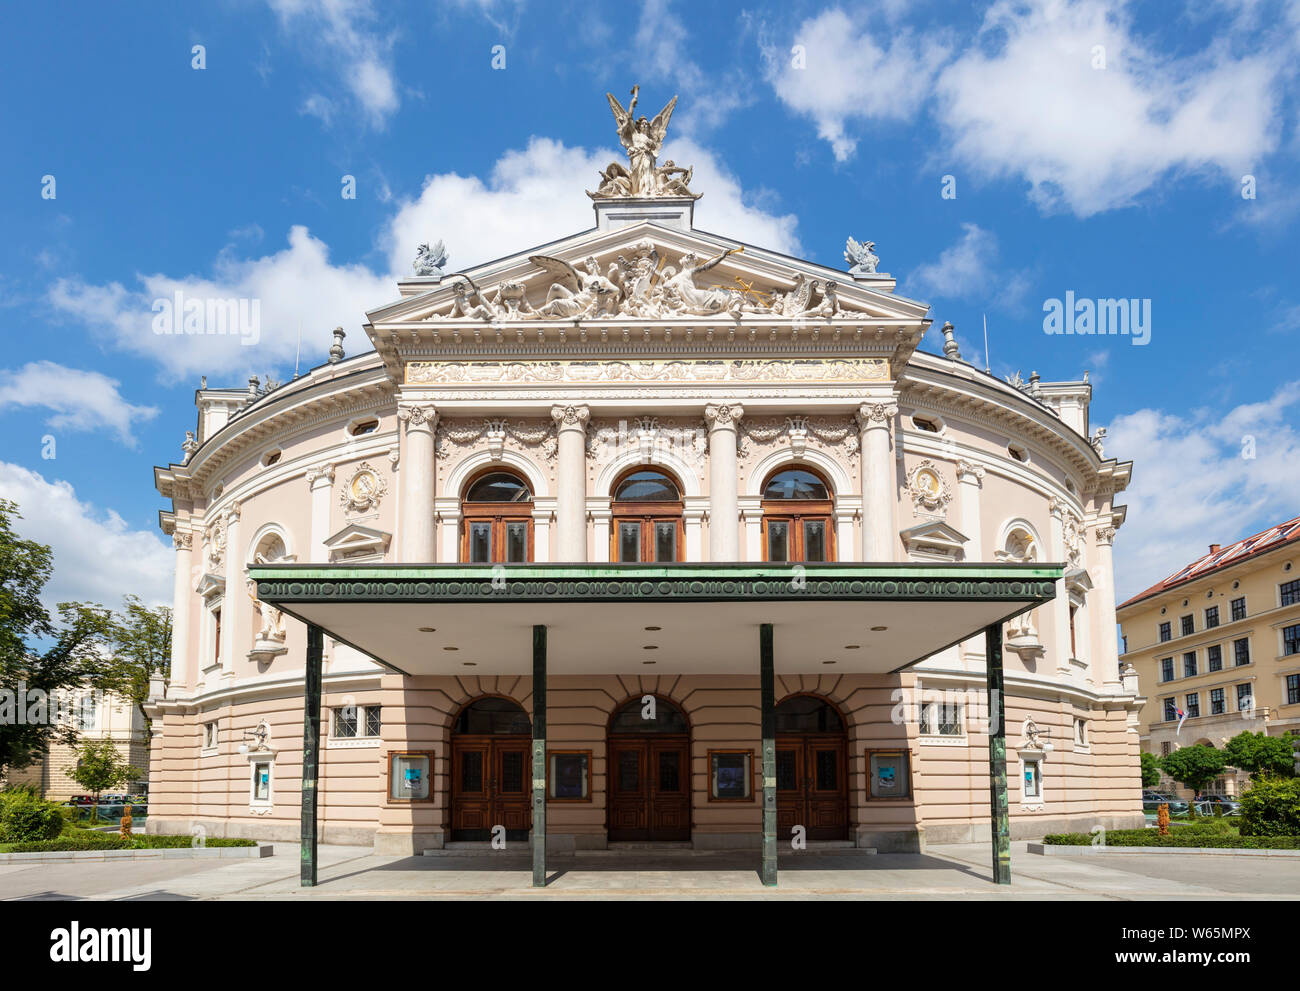 Front view of the Ljubljana Opera house or Slovenian National Opera and Ballet Theatre of Ljubljana Župančičeva ulica Ljubljana Slovenia Eu Europe Stock Photo